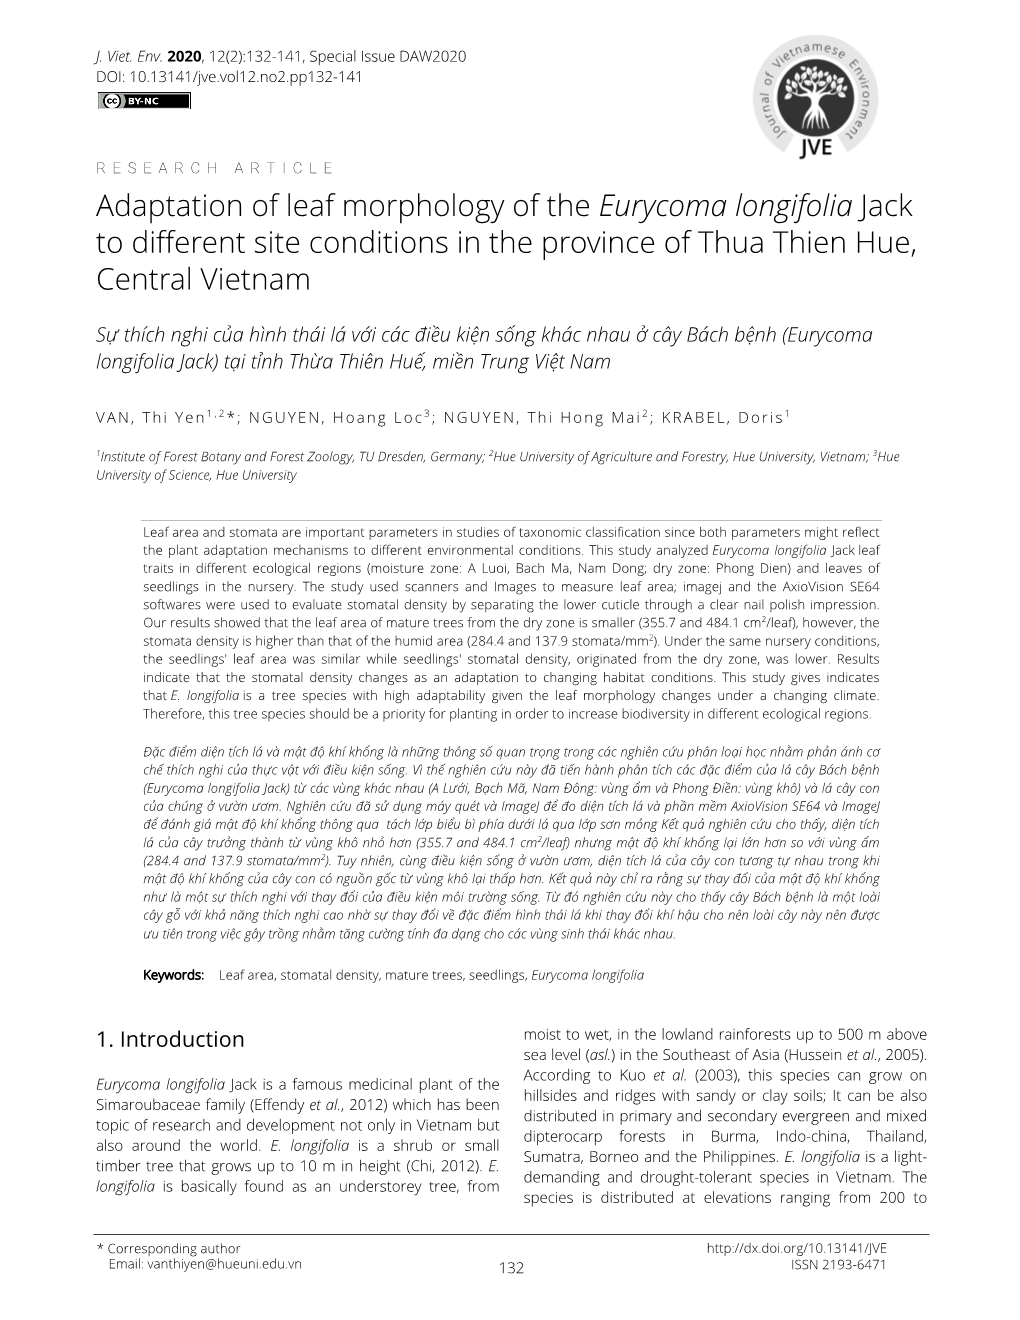 Adaptation of Leaf Morphology of the Eurycoma Longifolia Jack to Different Site Conditions in the Province of Thua Thien Hue, Central Vietnam